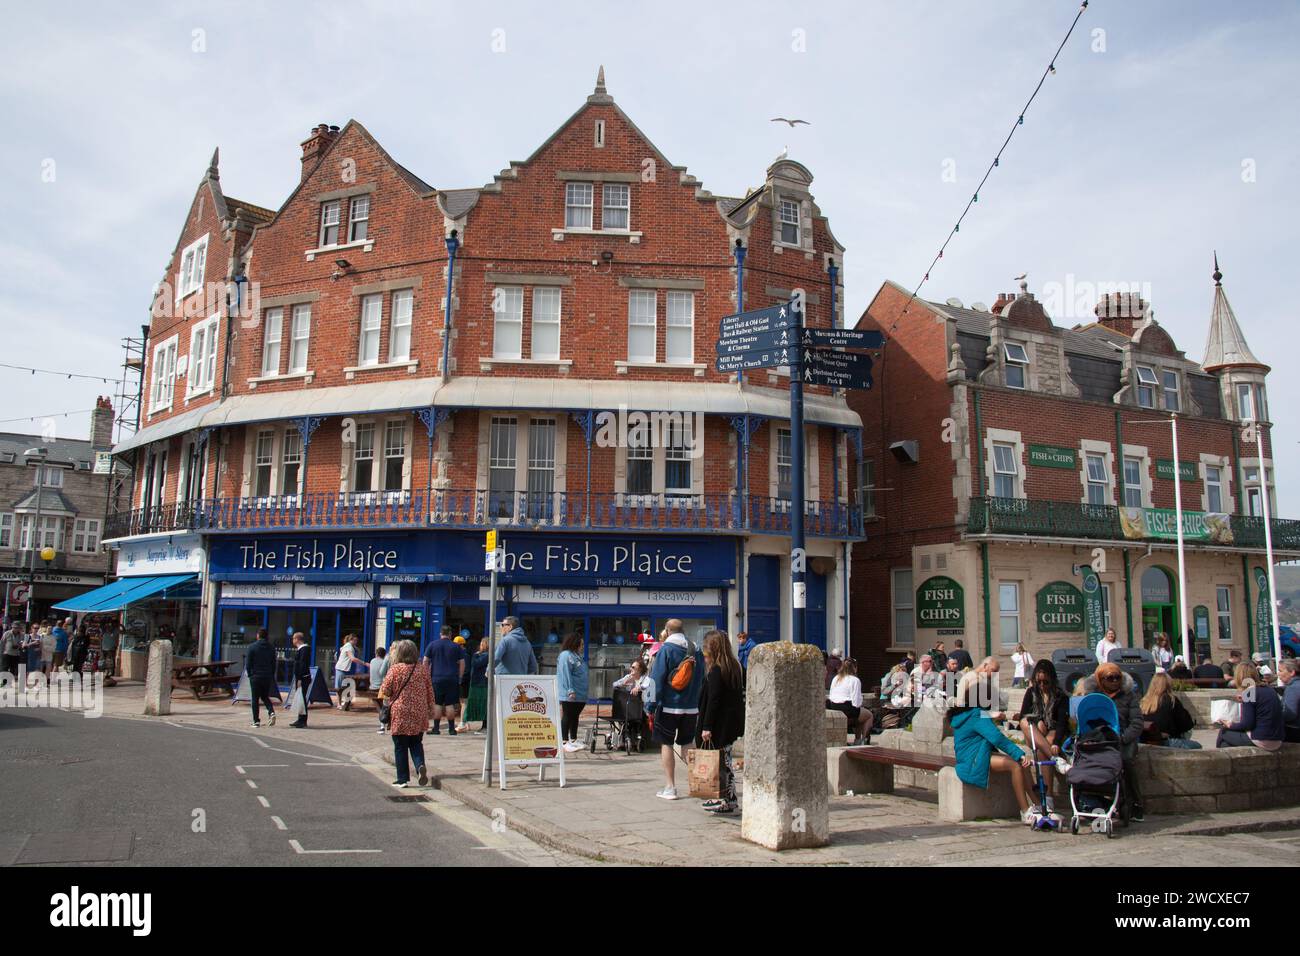 A fish and chip take away on the seafront in Swanage, Dorset in the UK Stock Photo